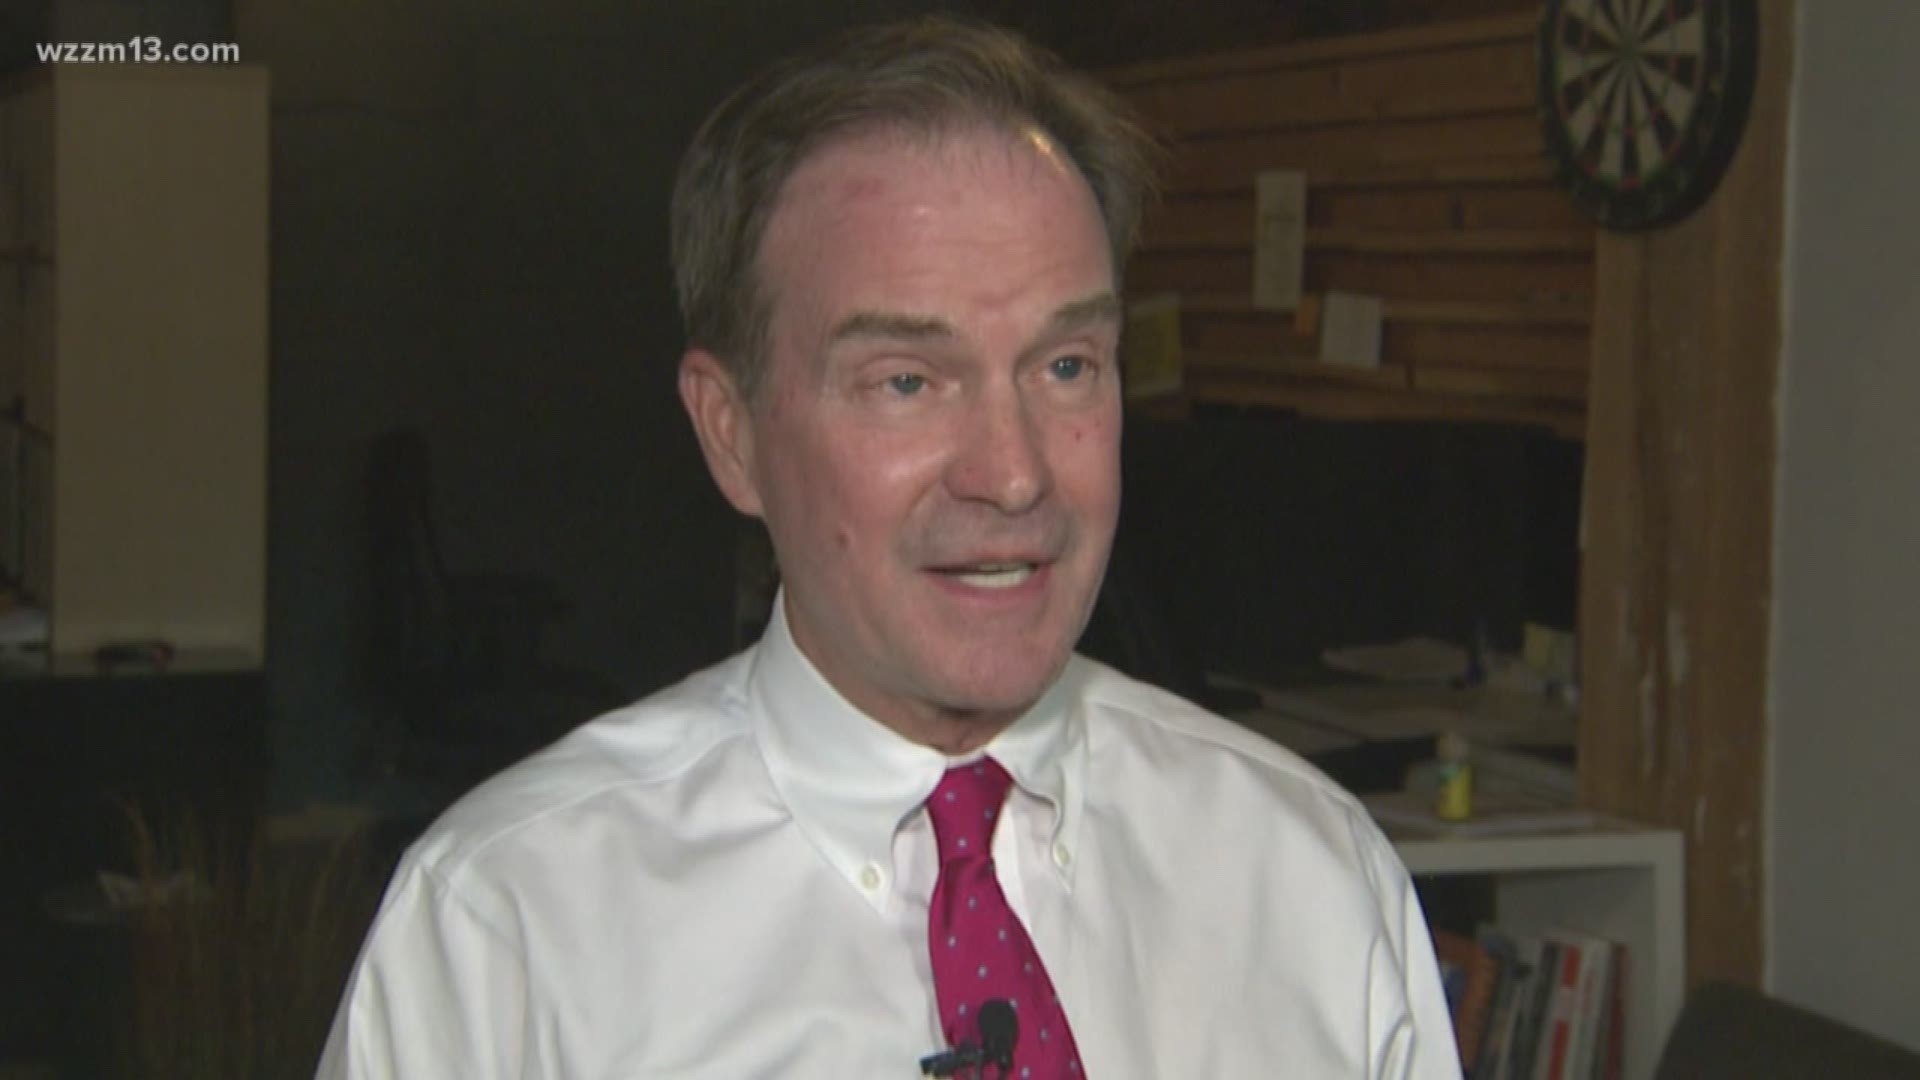 Schuette on his health benefits stance